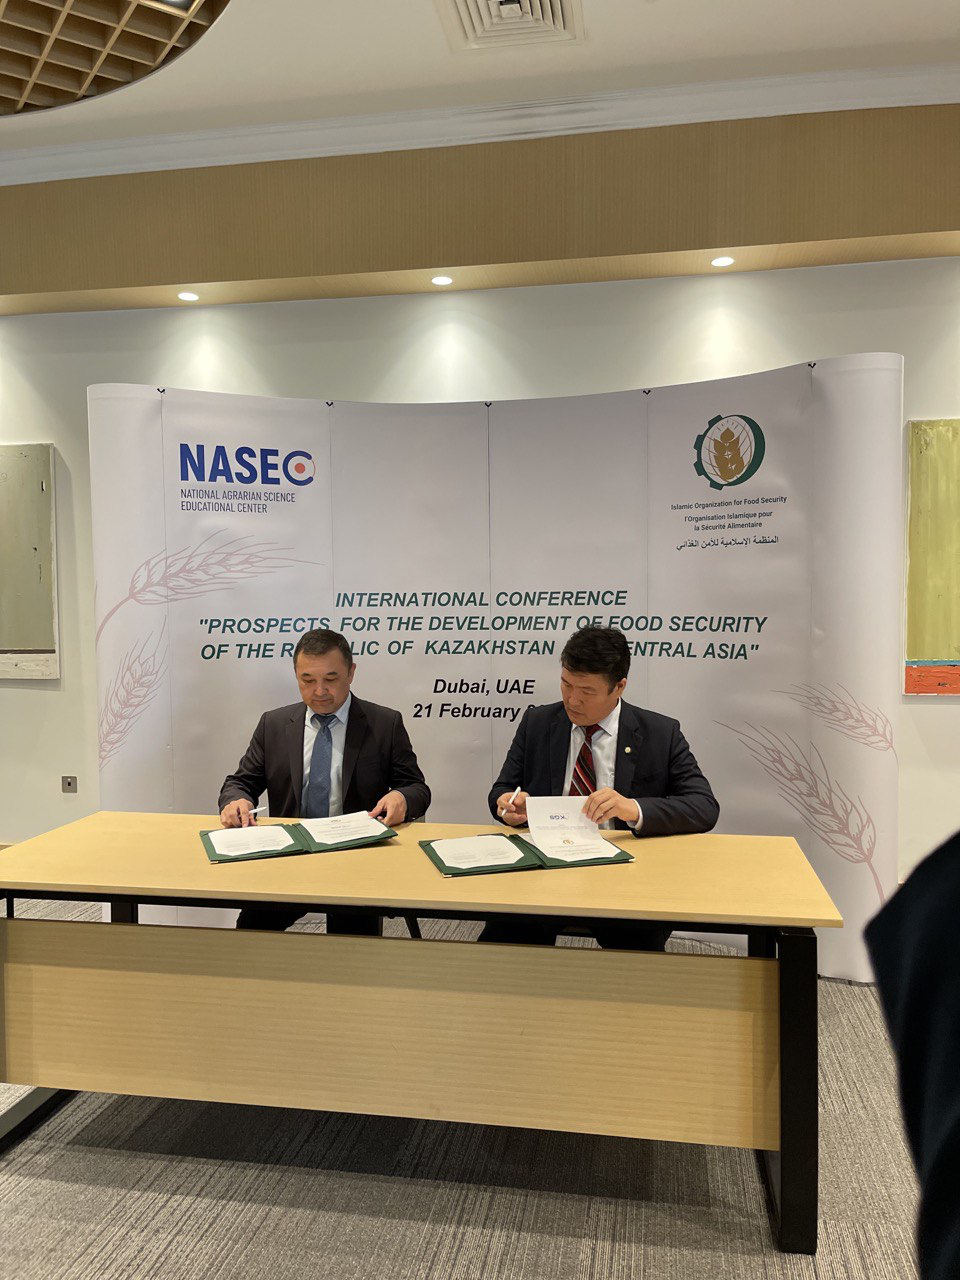 Prospects for the development of food security  of the Republic of Kazakhstan and Central Asia  International Conference was held at the EXPO 2020 Dubai